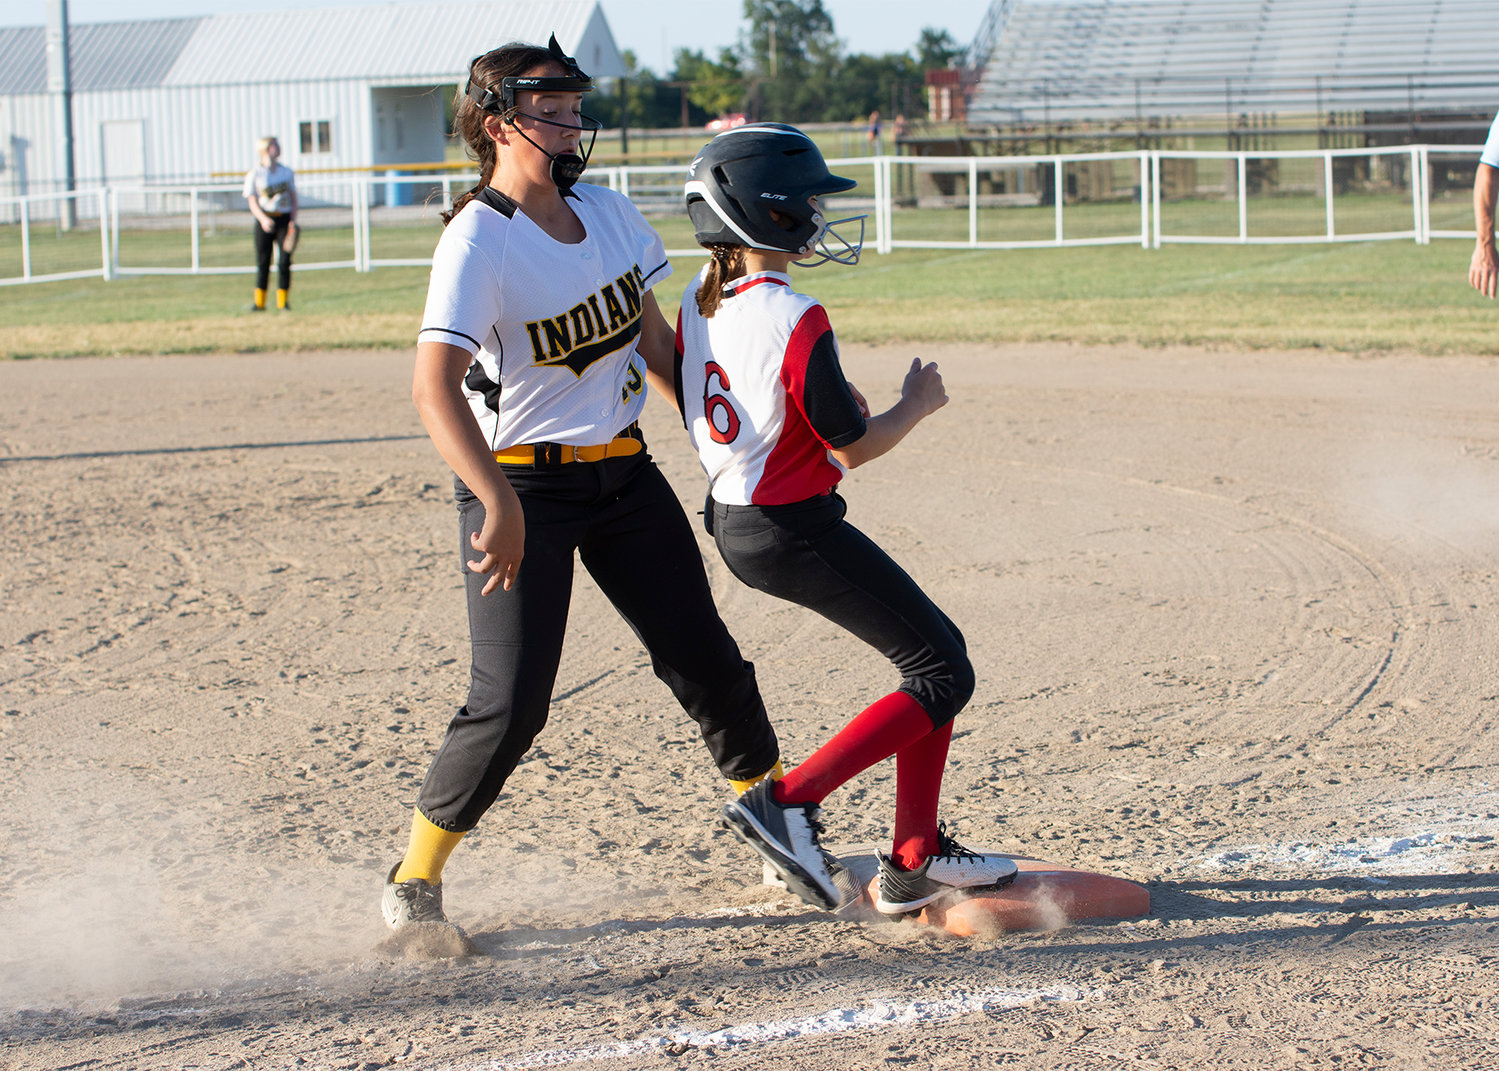 The Trojans Lydia Hoyt rushes to first base while Makayla McCurdy, first baseman for the Indians, tries to make the play during middle school softball action. [Leslie A Meyer Photography]